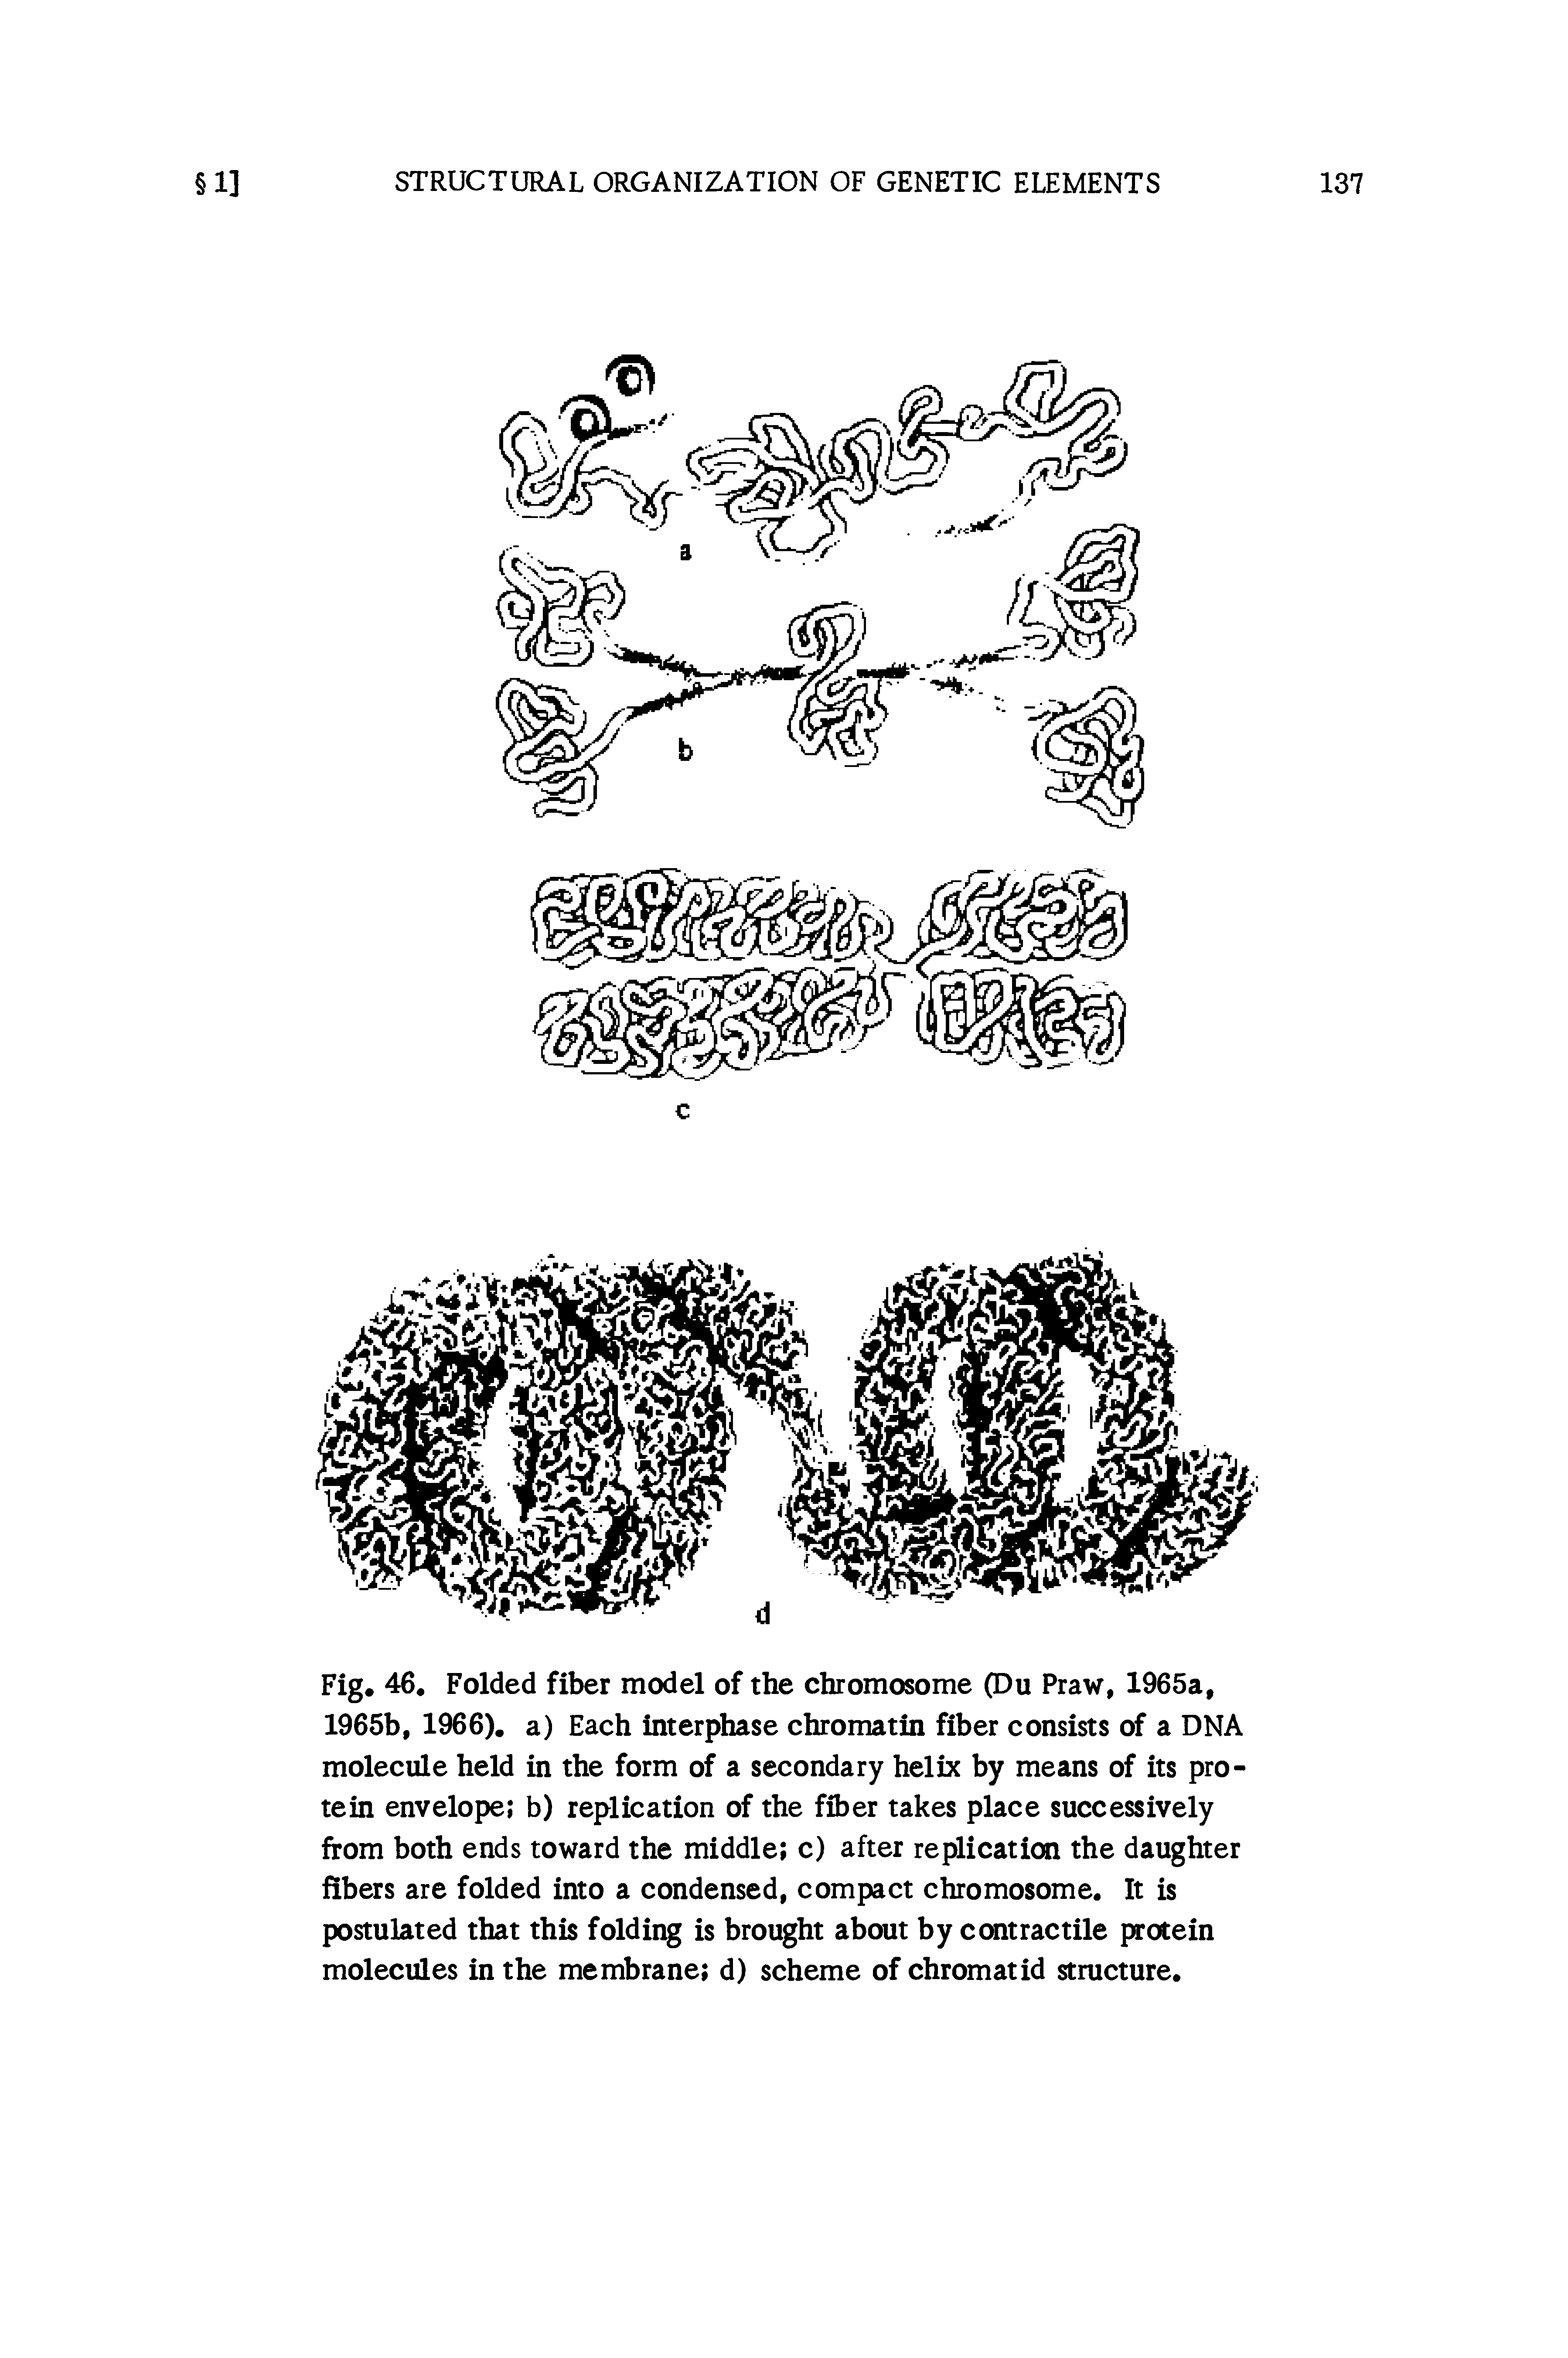 Fig. 46, Folded fiber model of the chromosome (Du Praw, 1965a, 1965b, 1966). a) Each interphase chromatin fiber consists of a DNA molecule held in the form of a secondary helix by means of its protein envelope b) replication of the fiber takes place successively from both ends toward the middle c) after replication the daughter fibers are folded into a condensed, compact chromosome. It is postulated that this folding is brought about by contractile protein molecules in the membrane d) scheme of chromatid stracture.